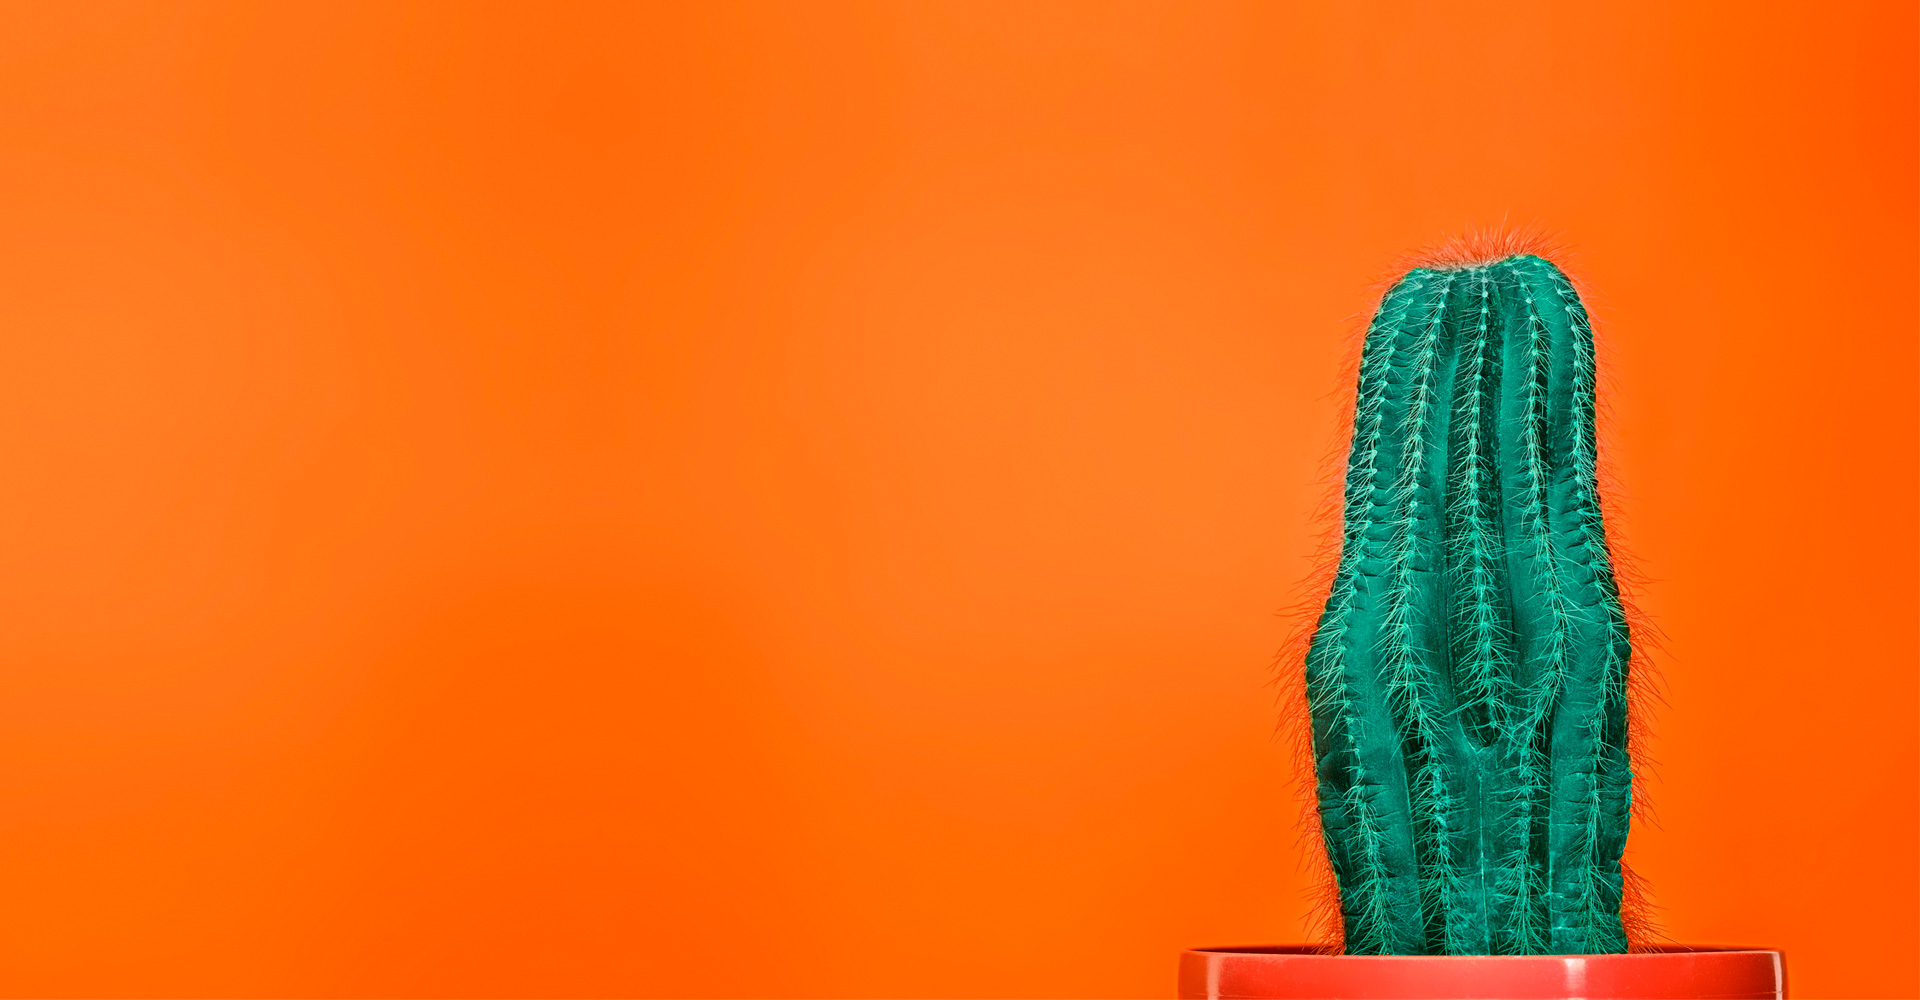 A beautiful cactus on an orange background. This imagery reflects the messaging that SEO is still largely the wild west online.